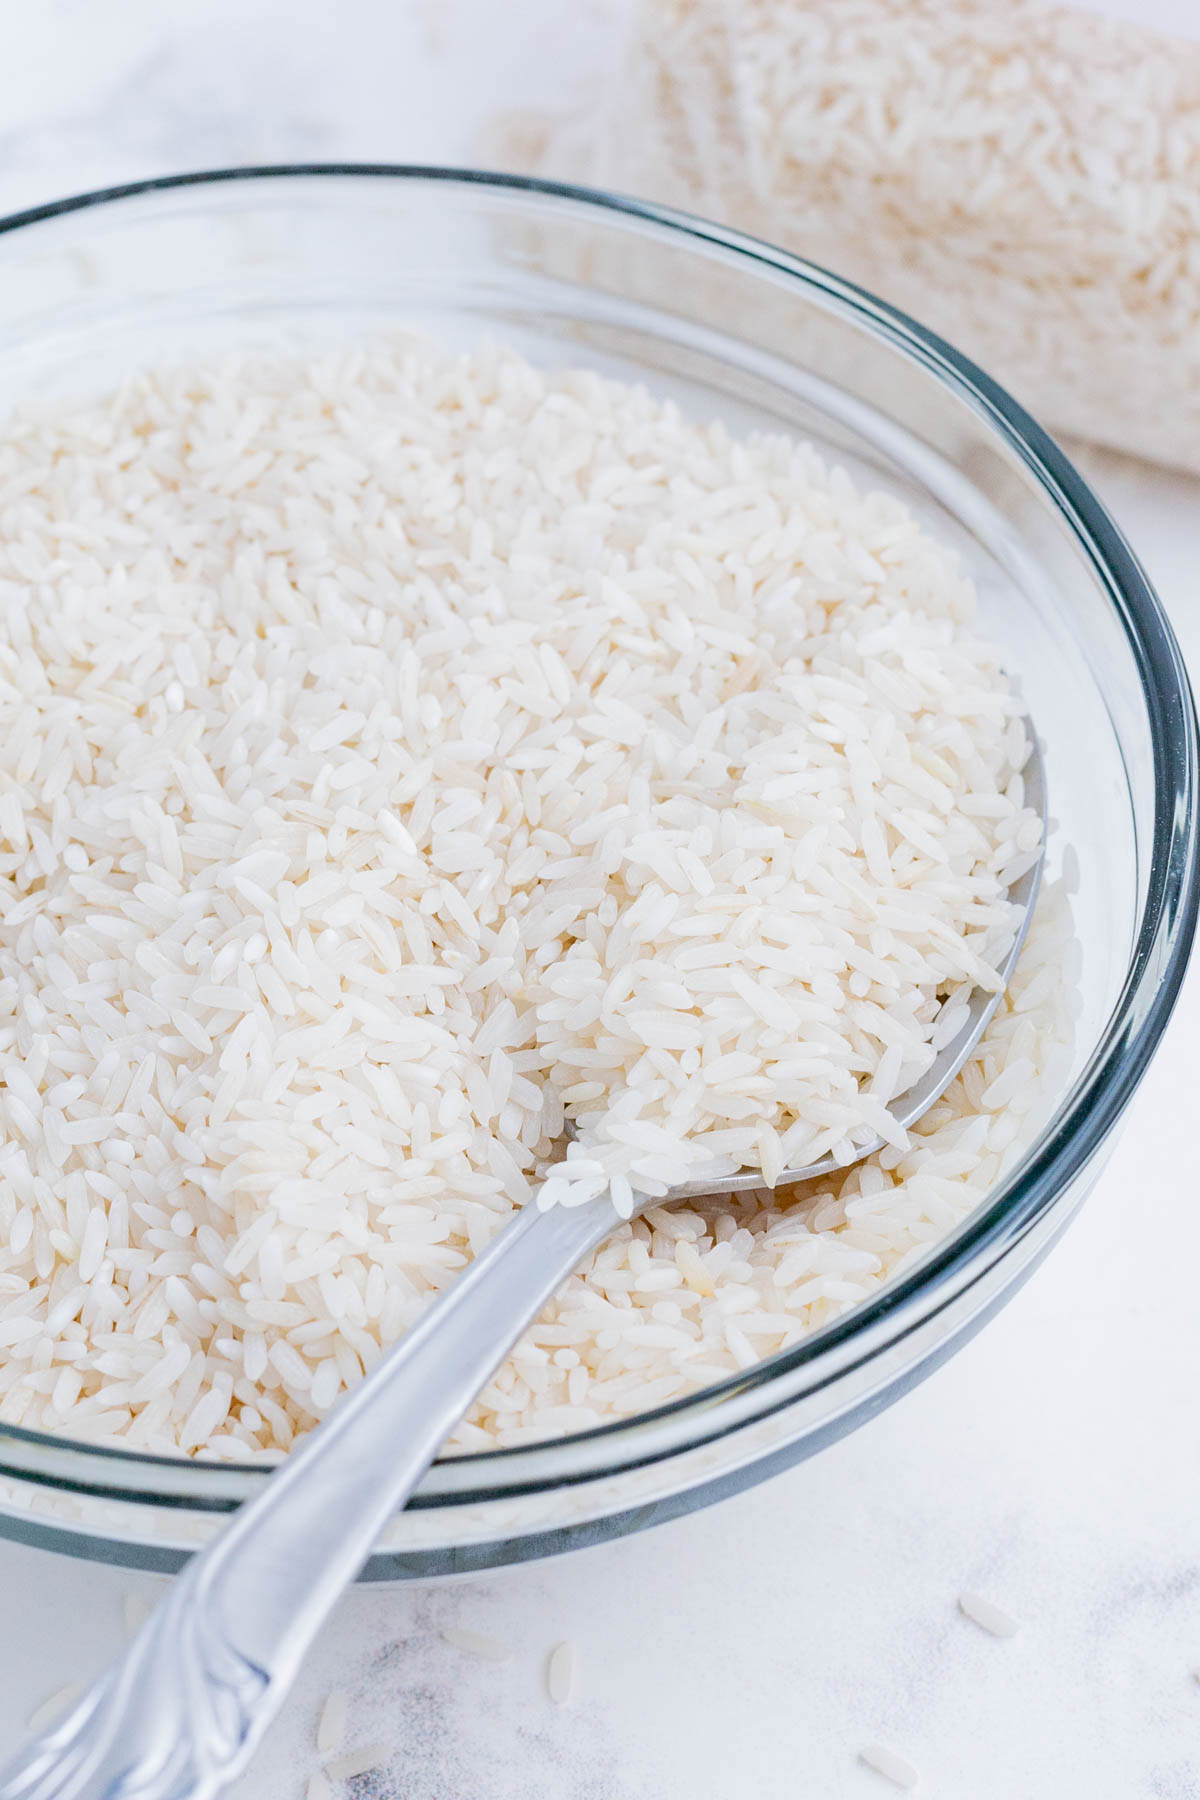 Dry white rice in a clear bowl with a silver spoon.